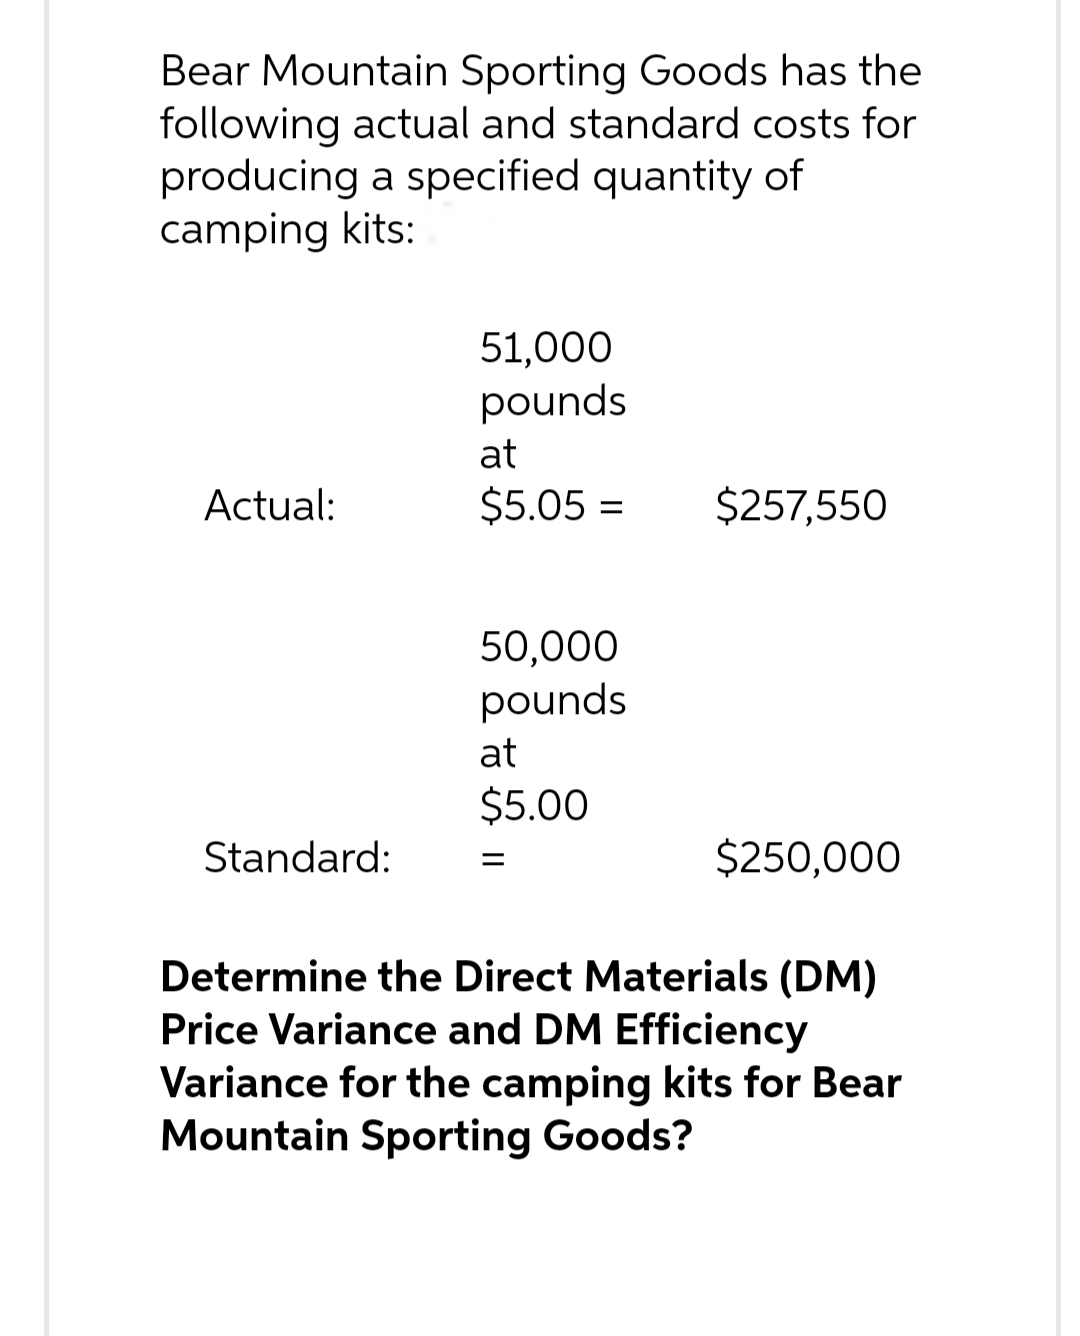 Bear Mountain Sporting Goods has the
following actual and standard costs for
producing a specified quantity of
camping kits:
Actual:
Standard:
51,000
pounds
at
$5.05 =
50,000
pounds
at
$5.00
=
$257,550
$250,000
Determine the Direct Materials (DM)
Price Variance and DM Efficiency
Variance for the camping kits for Bear
Mountain Sporting Goods?